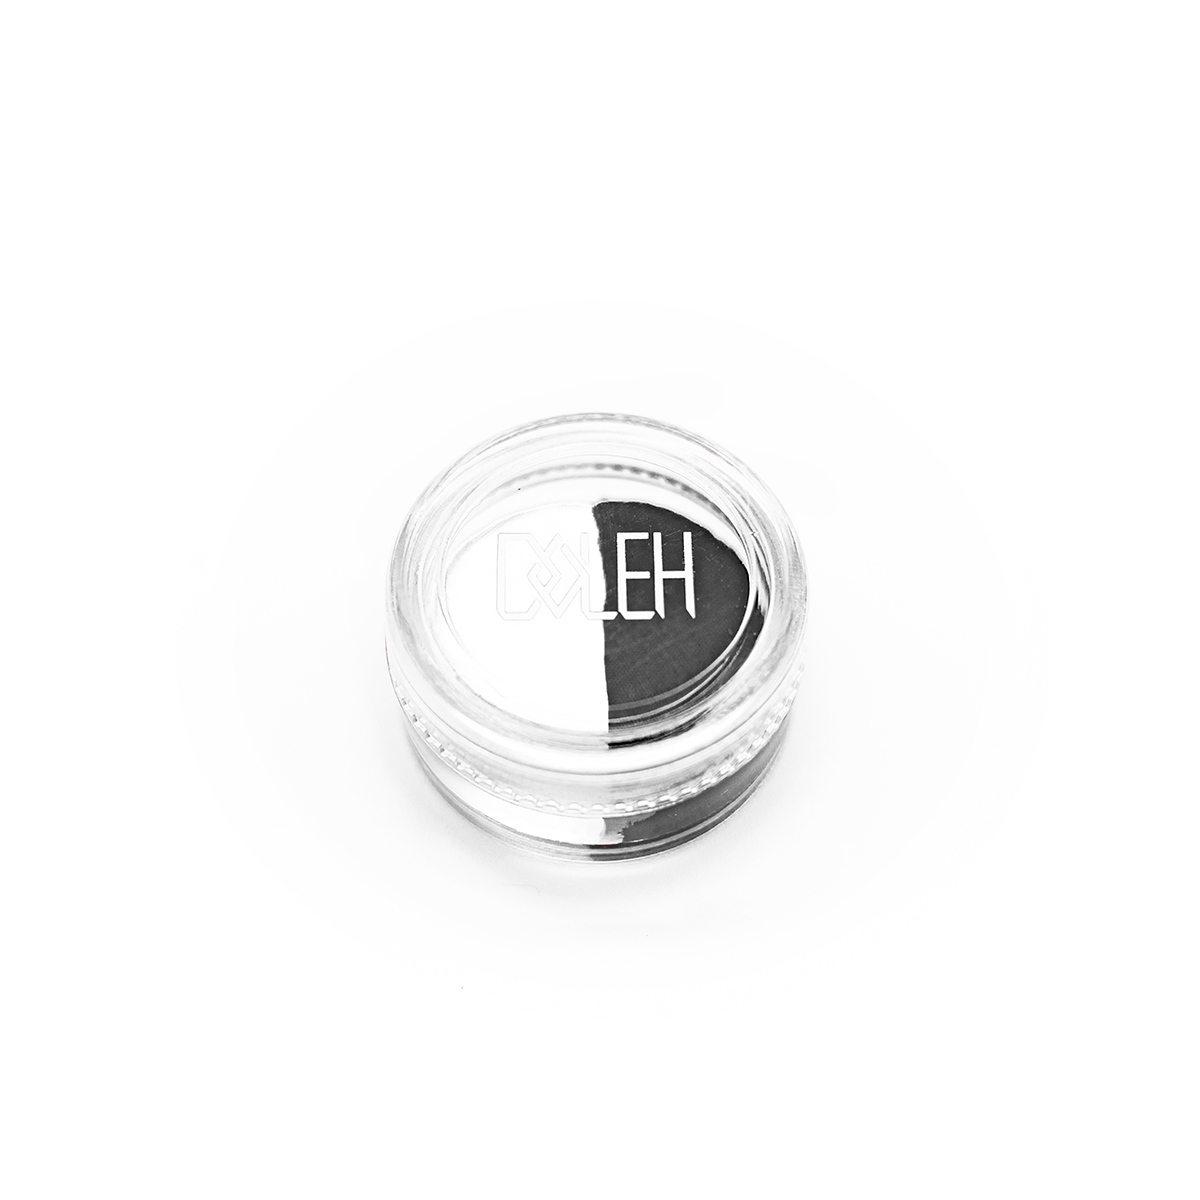 Vdunux Series Water-activated Eyeliner - Black & White